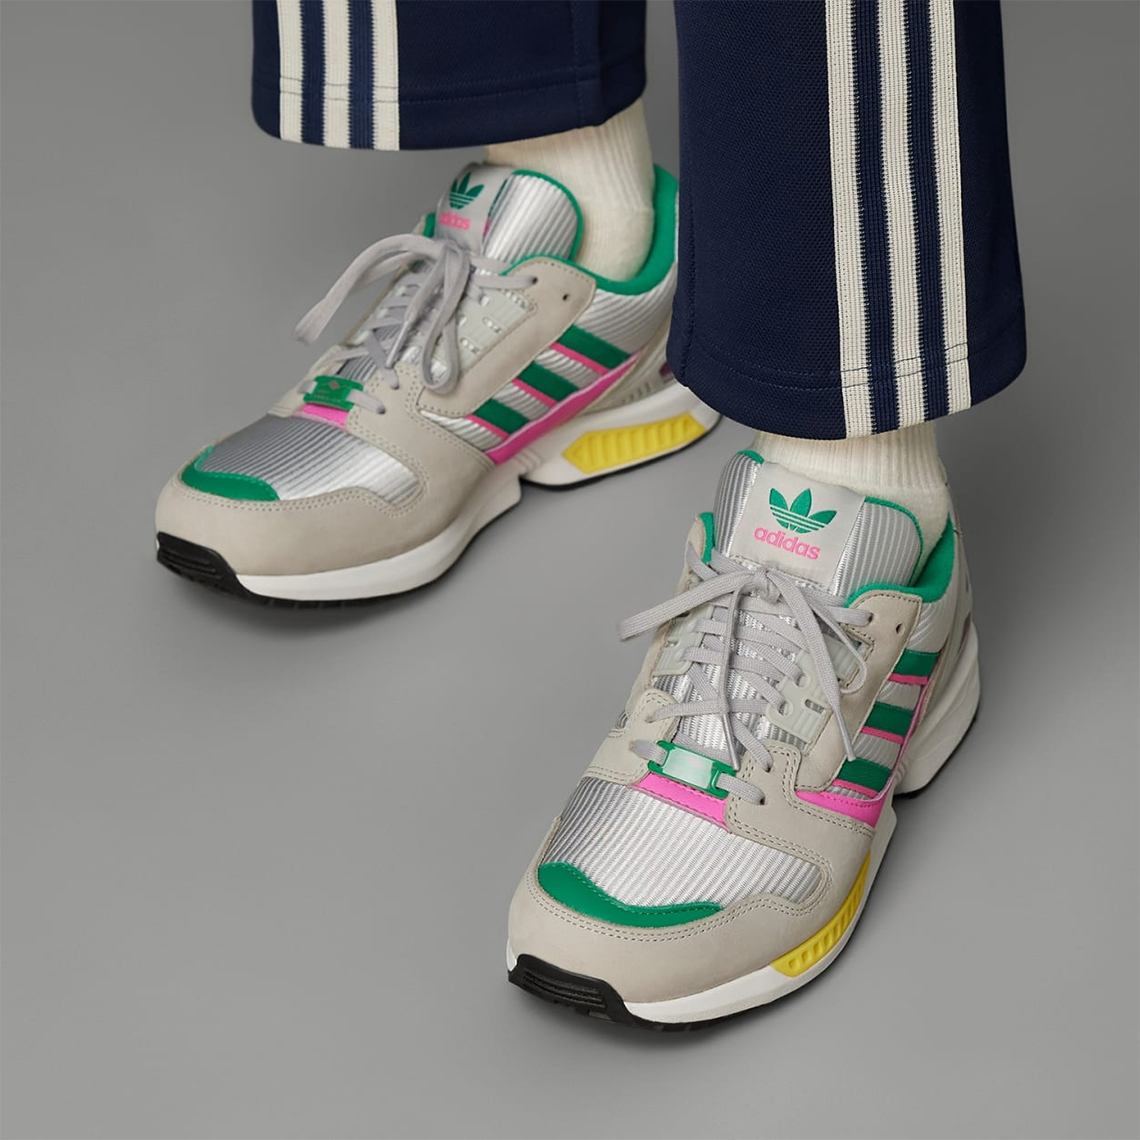 adidas zx8000 grey two court green screaming pink IG3076 4